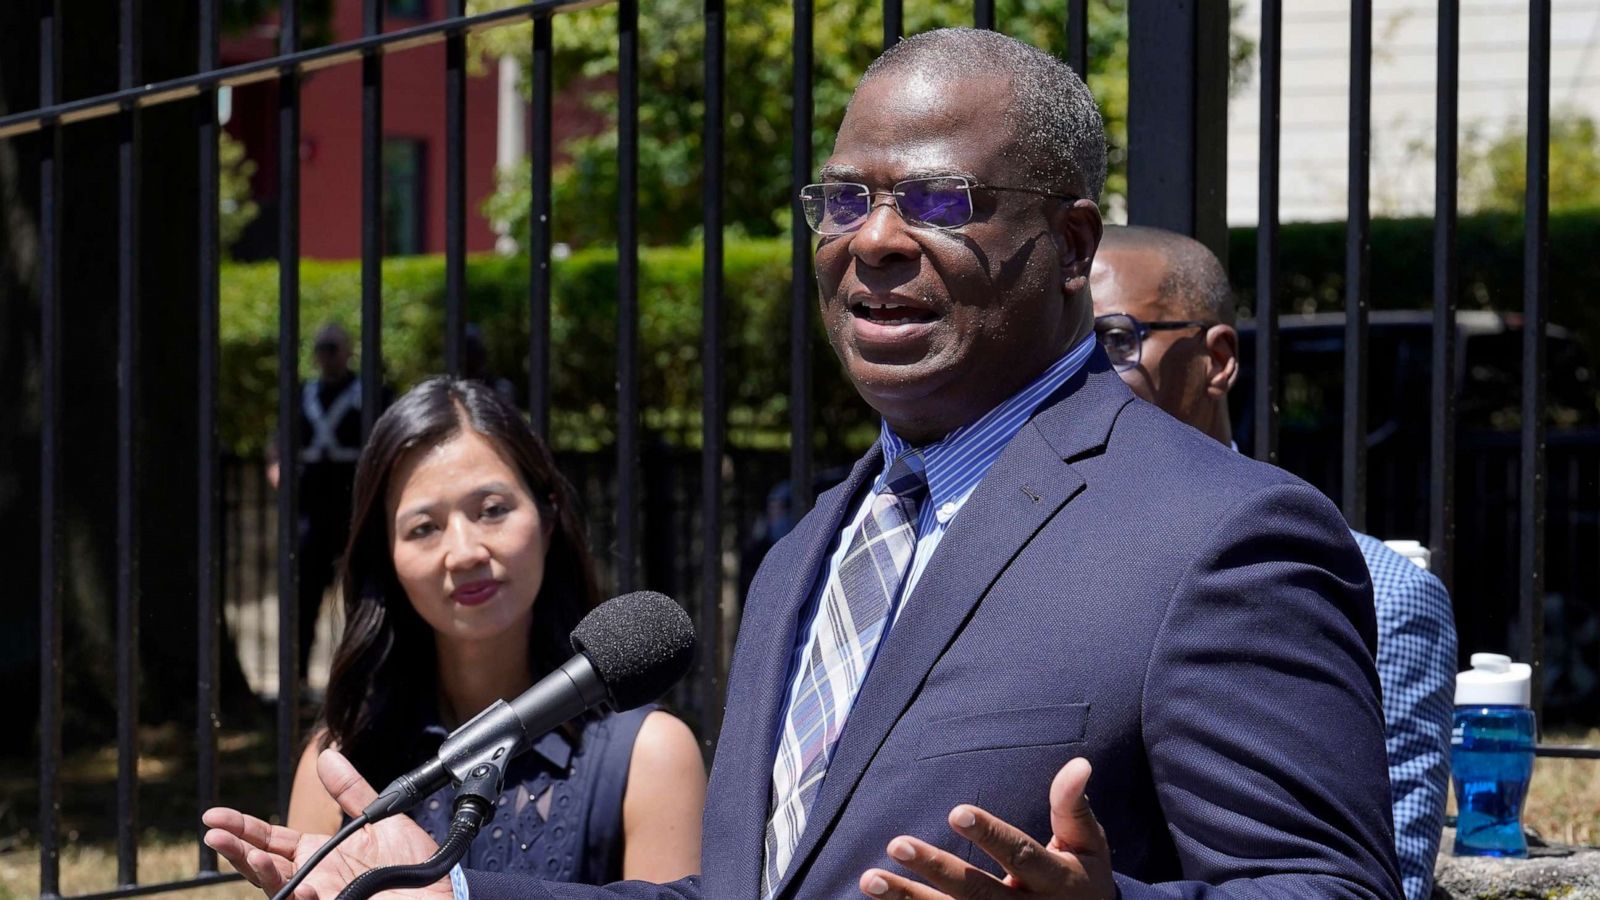 Michael Cox, Former Boston Police Officer Who Was Once Beaten by Colleagues, Named City’s New Police Commissioner